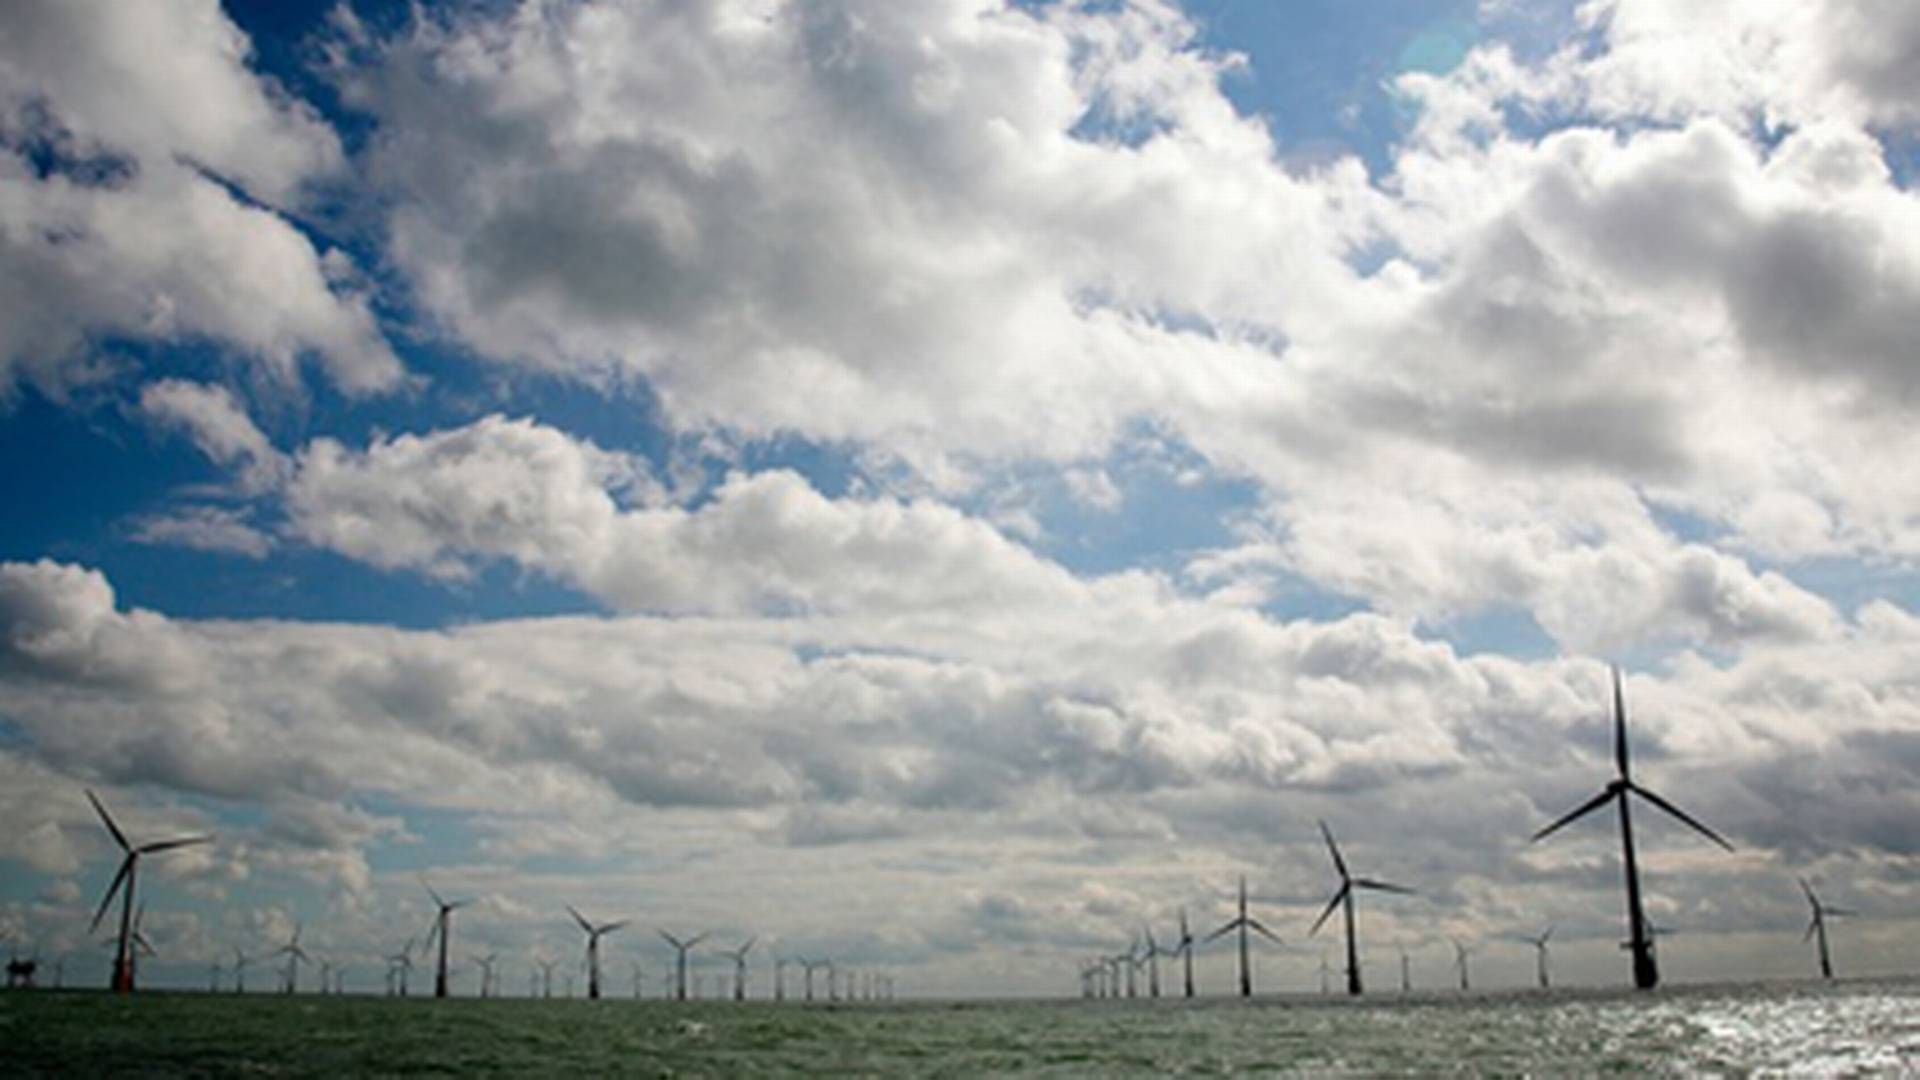 In 2010, Vattenfall constructed the largest offshore wind farm at the time with 300 MW across 100 Vestas turbines. Now, the Swedish company plans to build a larger farm but with just a third as many turbines. | Photo: Jamie Cook